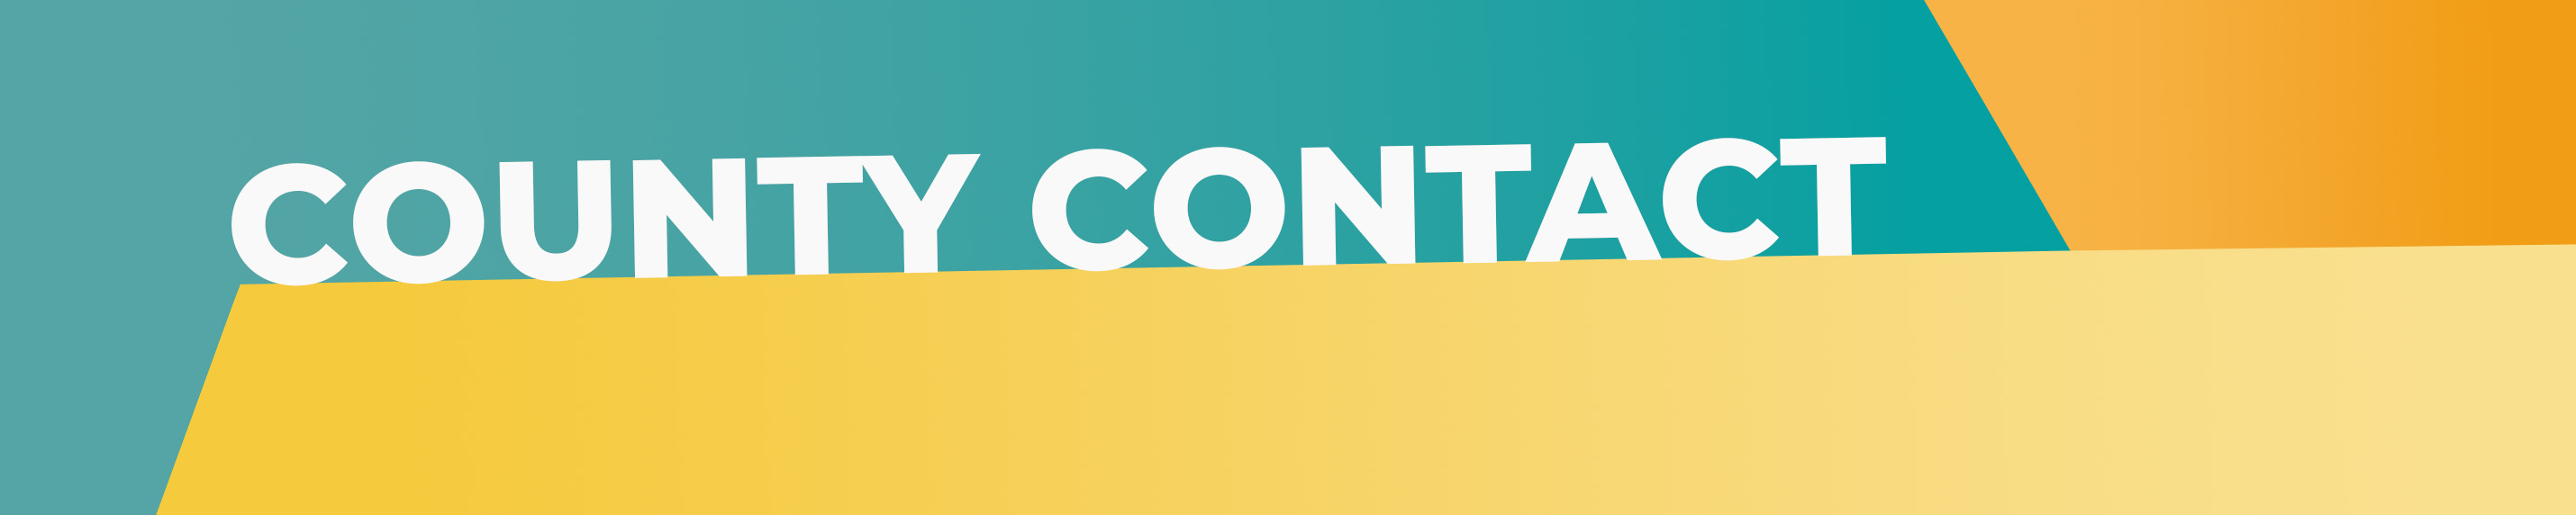 County Contact Banner